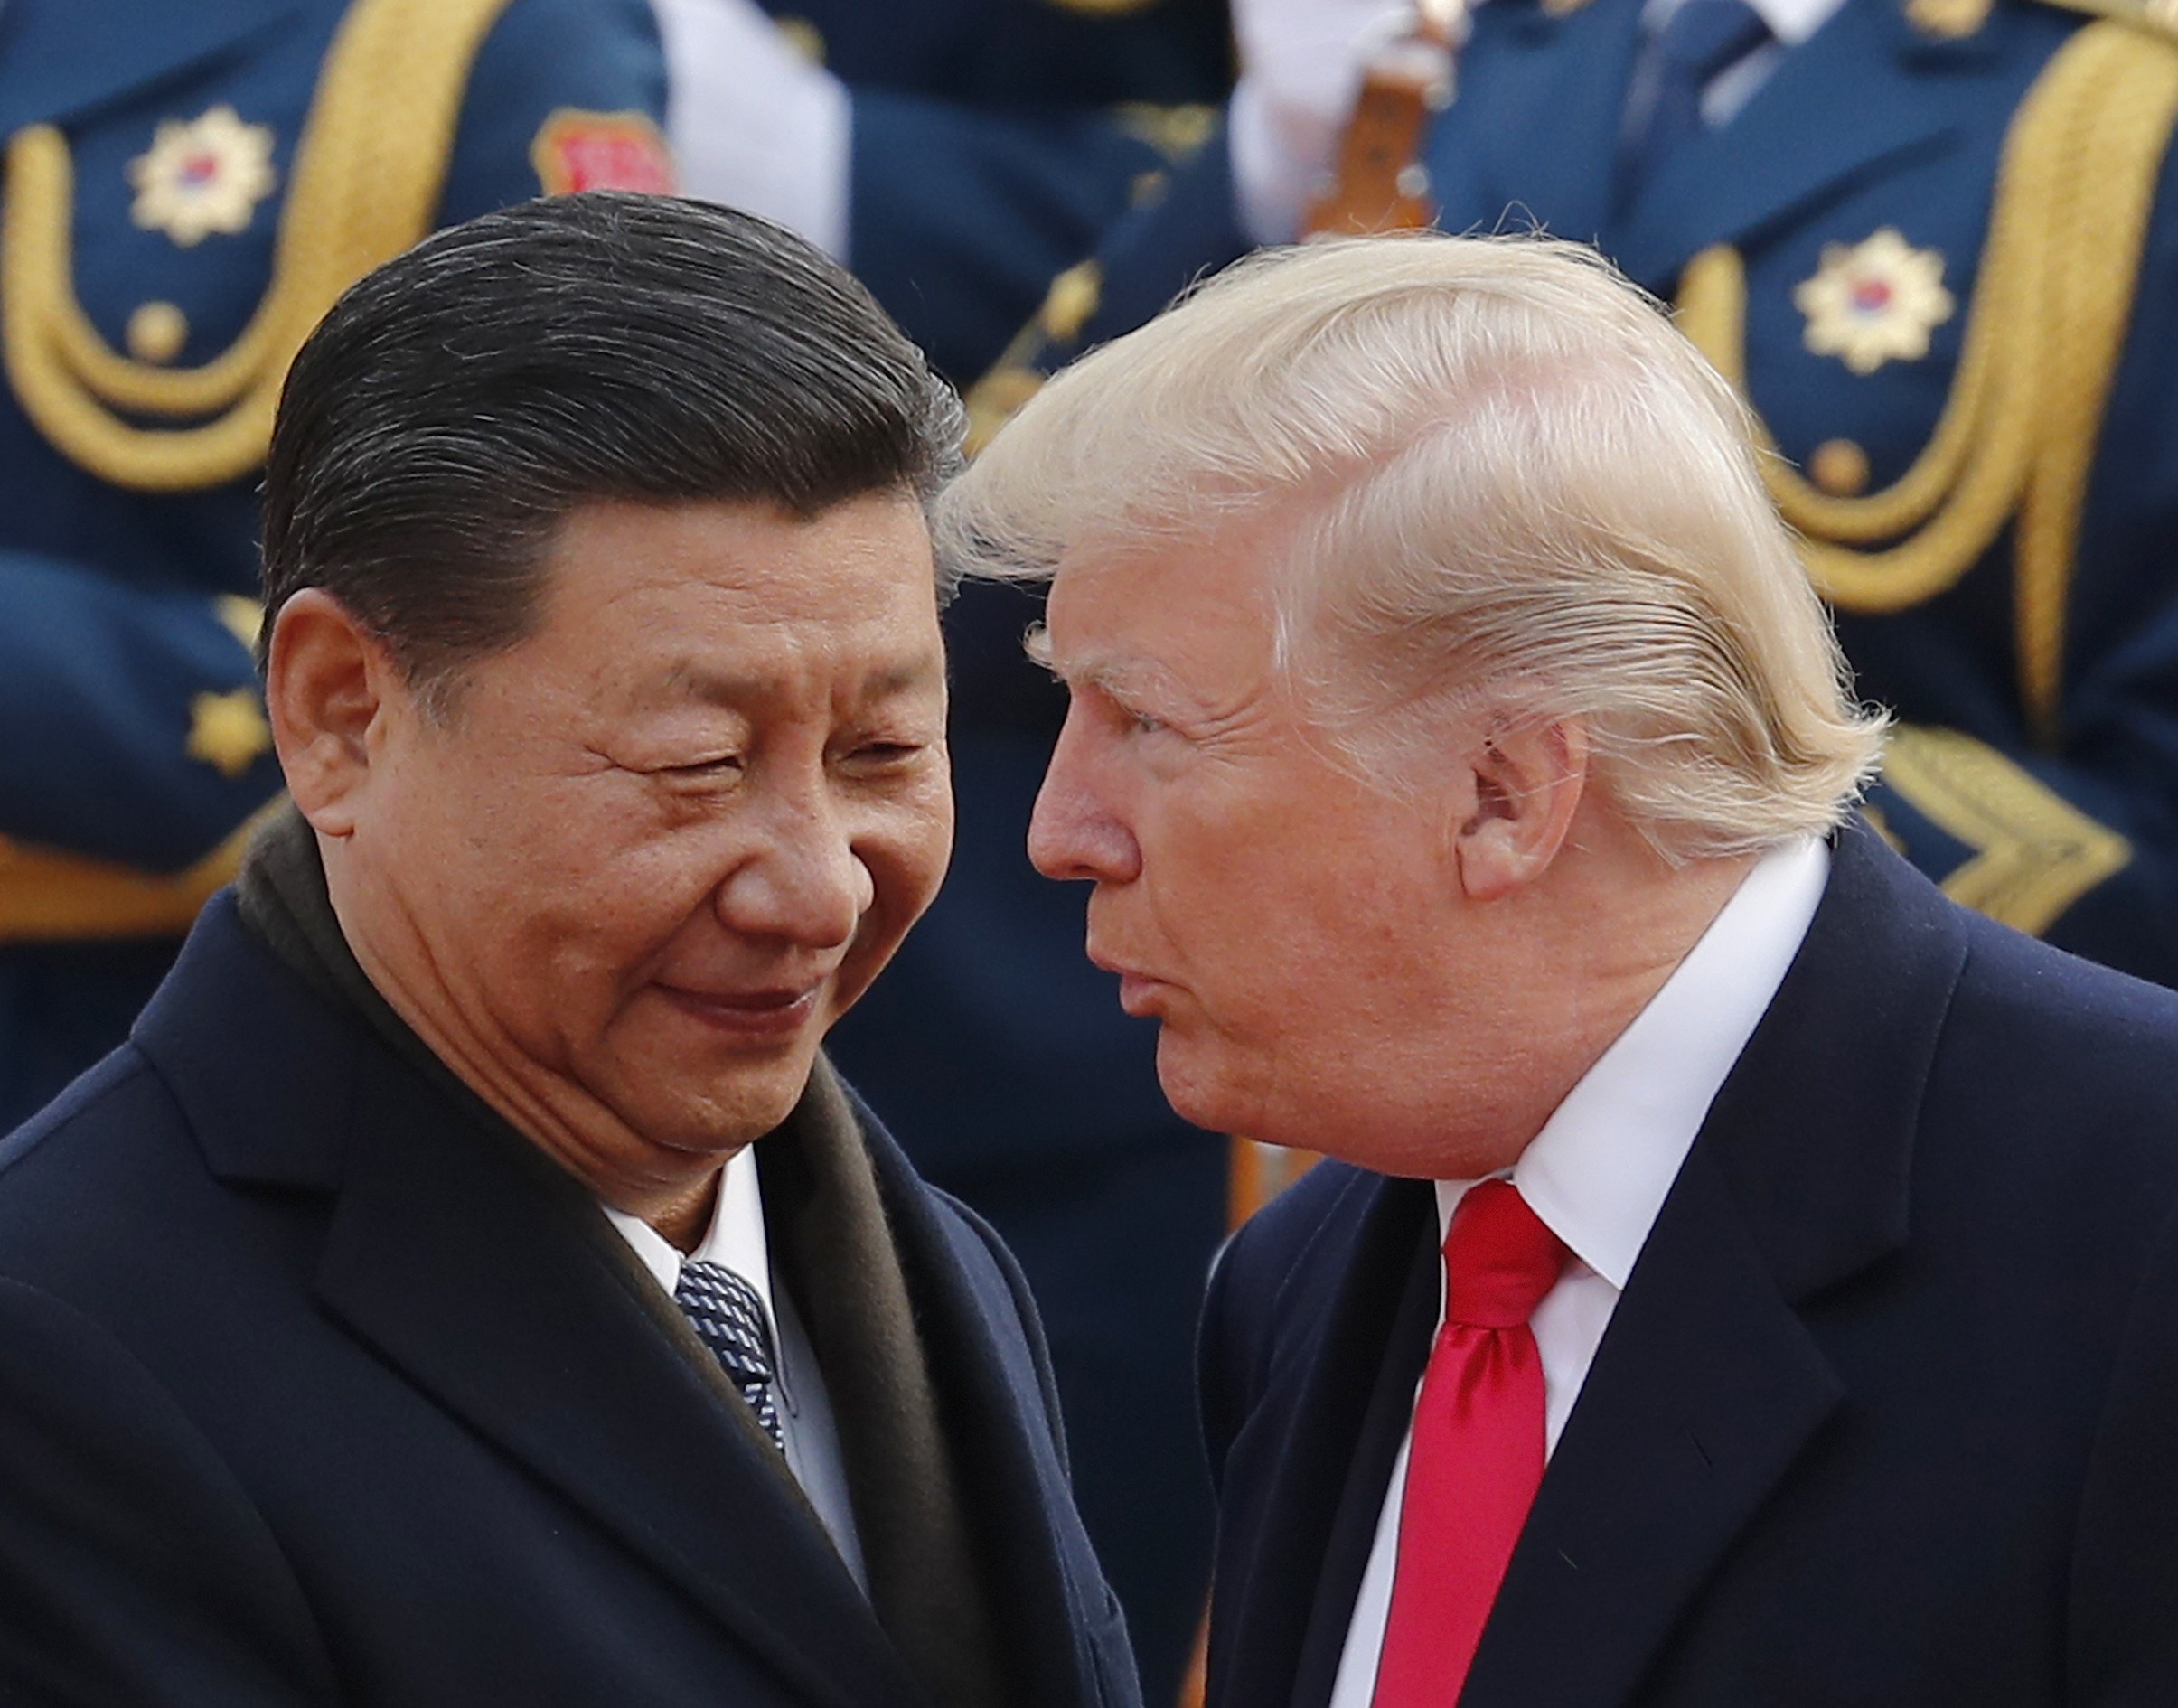 Chinese President Xi Jinping chats to US President Donald Trump during a welcoming ceremony at the Great Hall of the People in Beijing, on November 9. Photo: AP